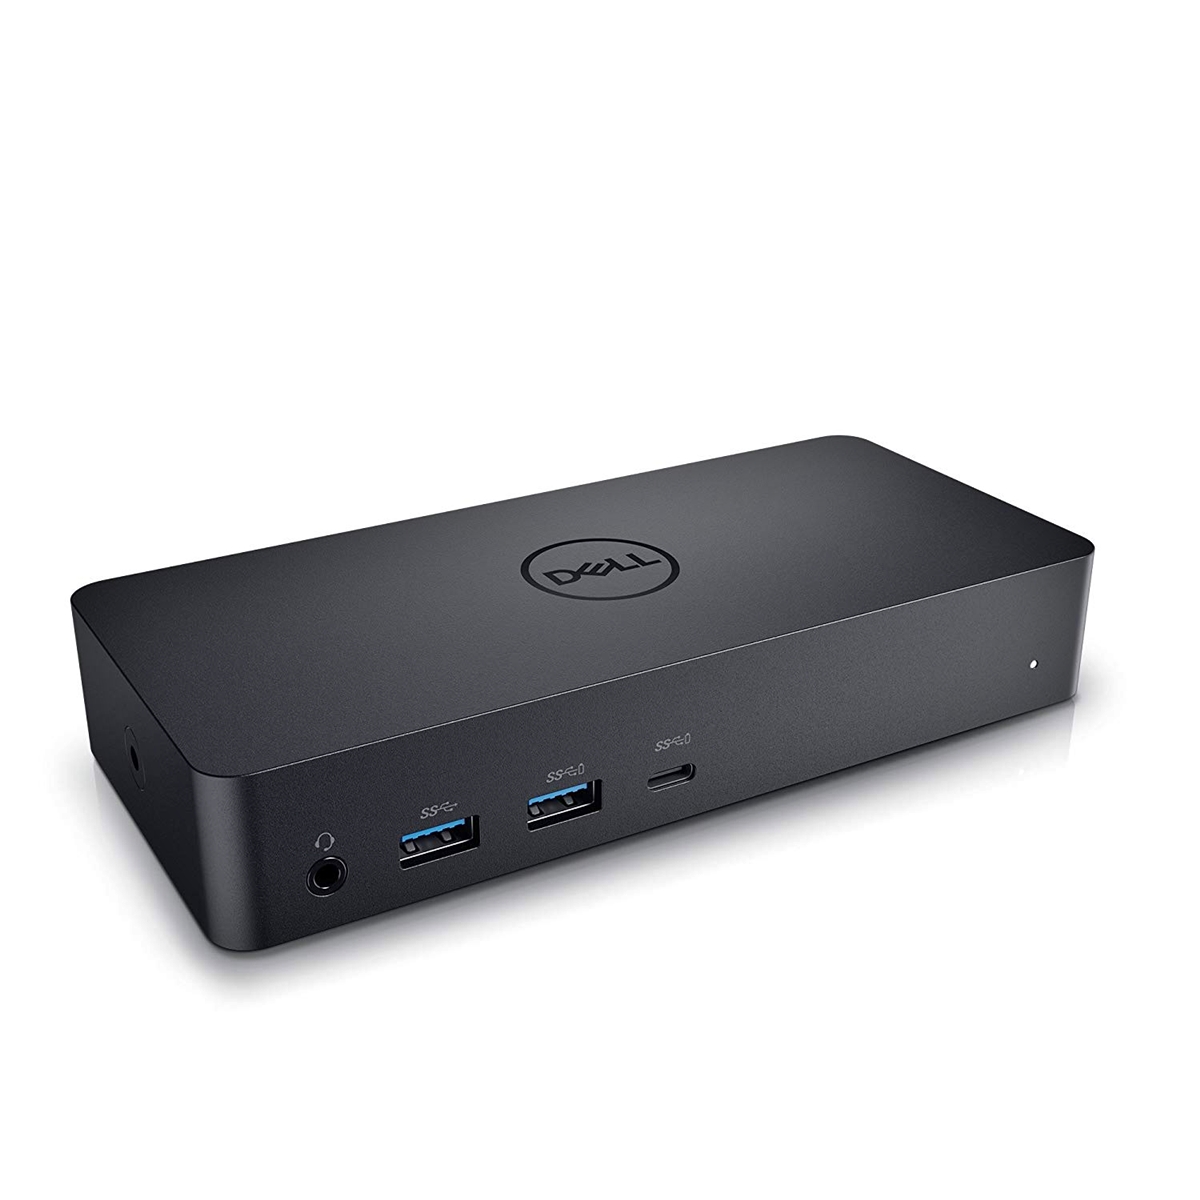 Quick Reset Guide For Dell Docking Station: Troubleshooting Tips